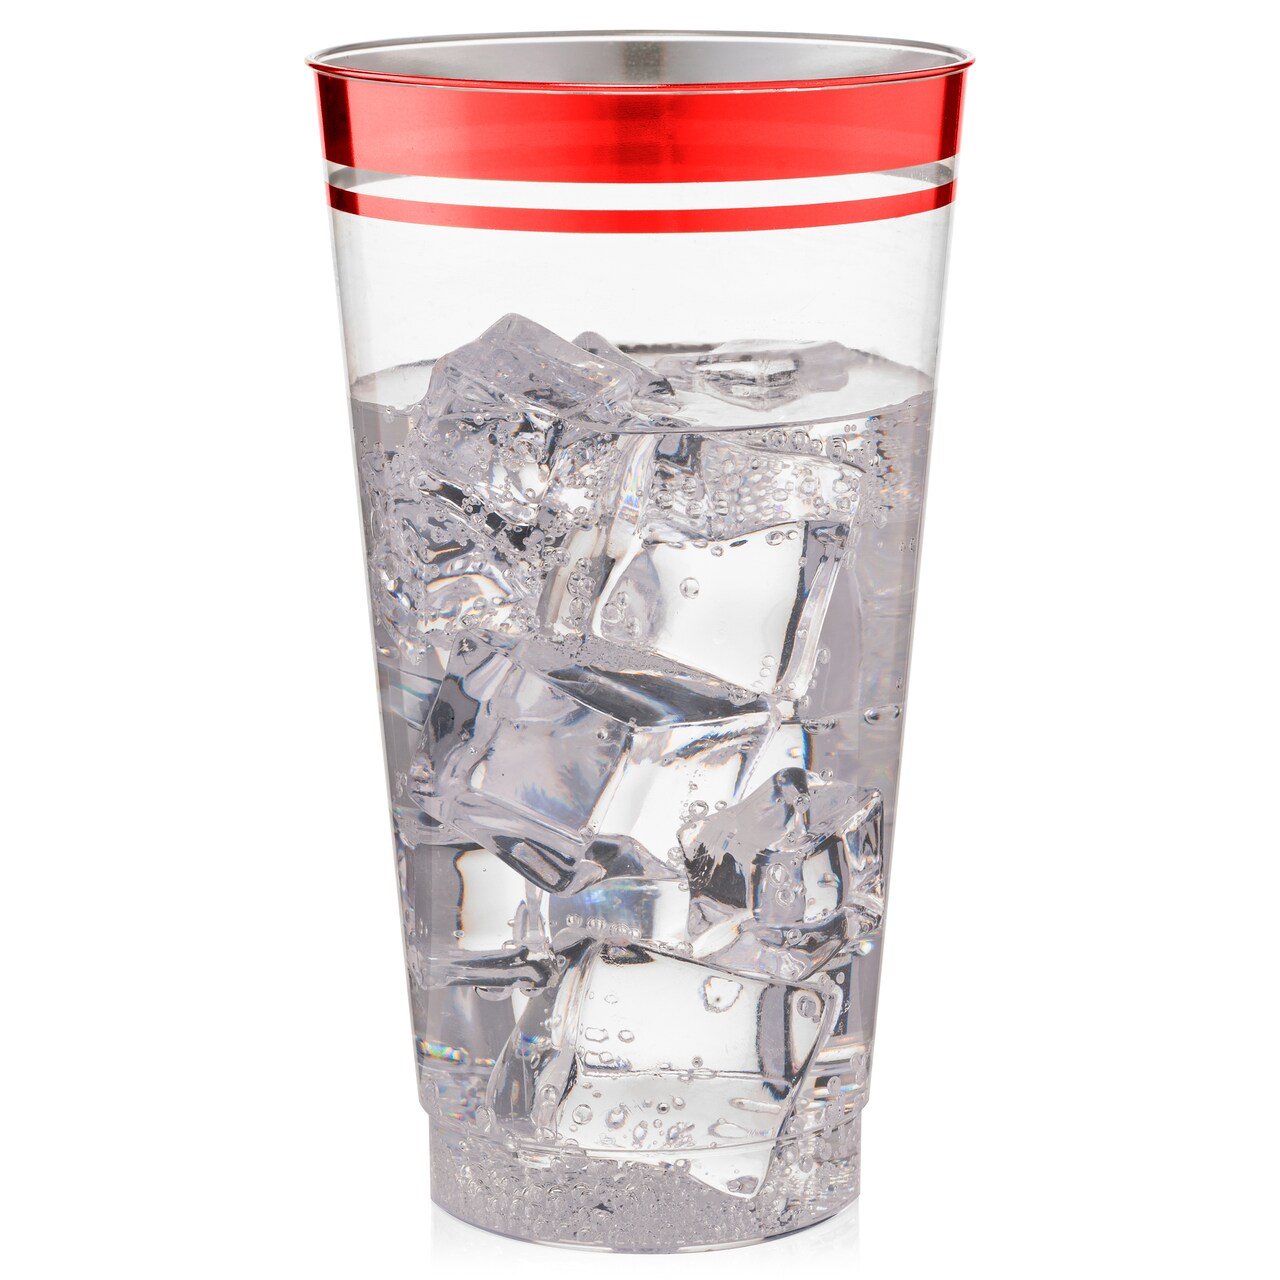 100 Pk 16 oz Clear Plastic Cups, Red Rimmed Disposable Cups